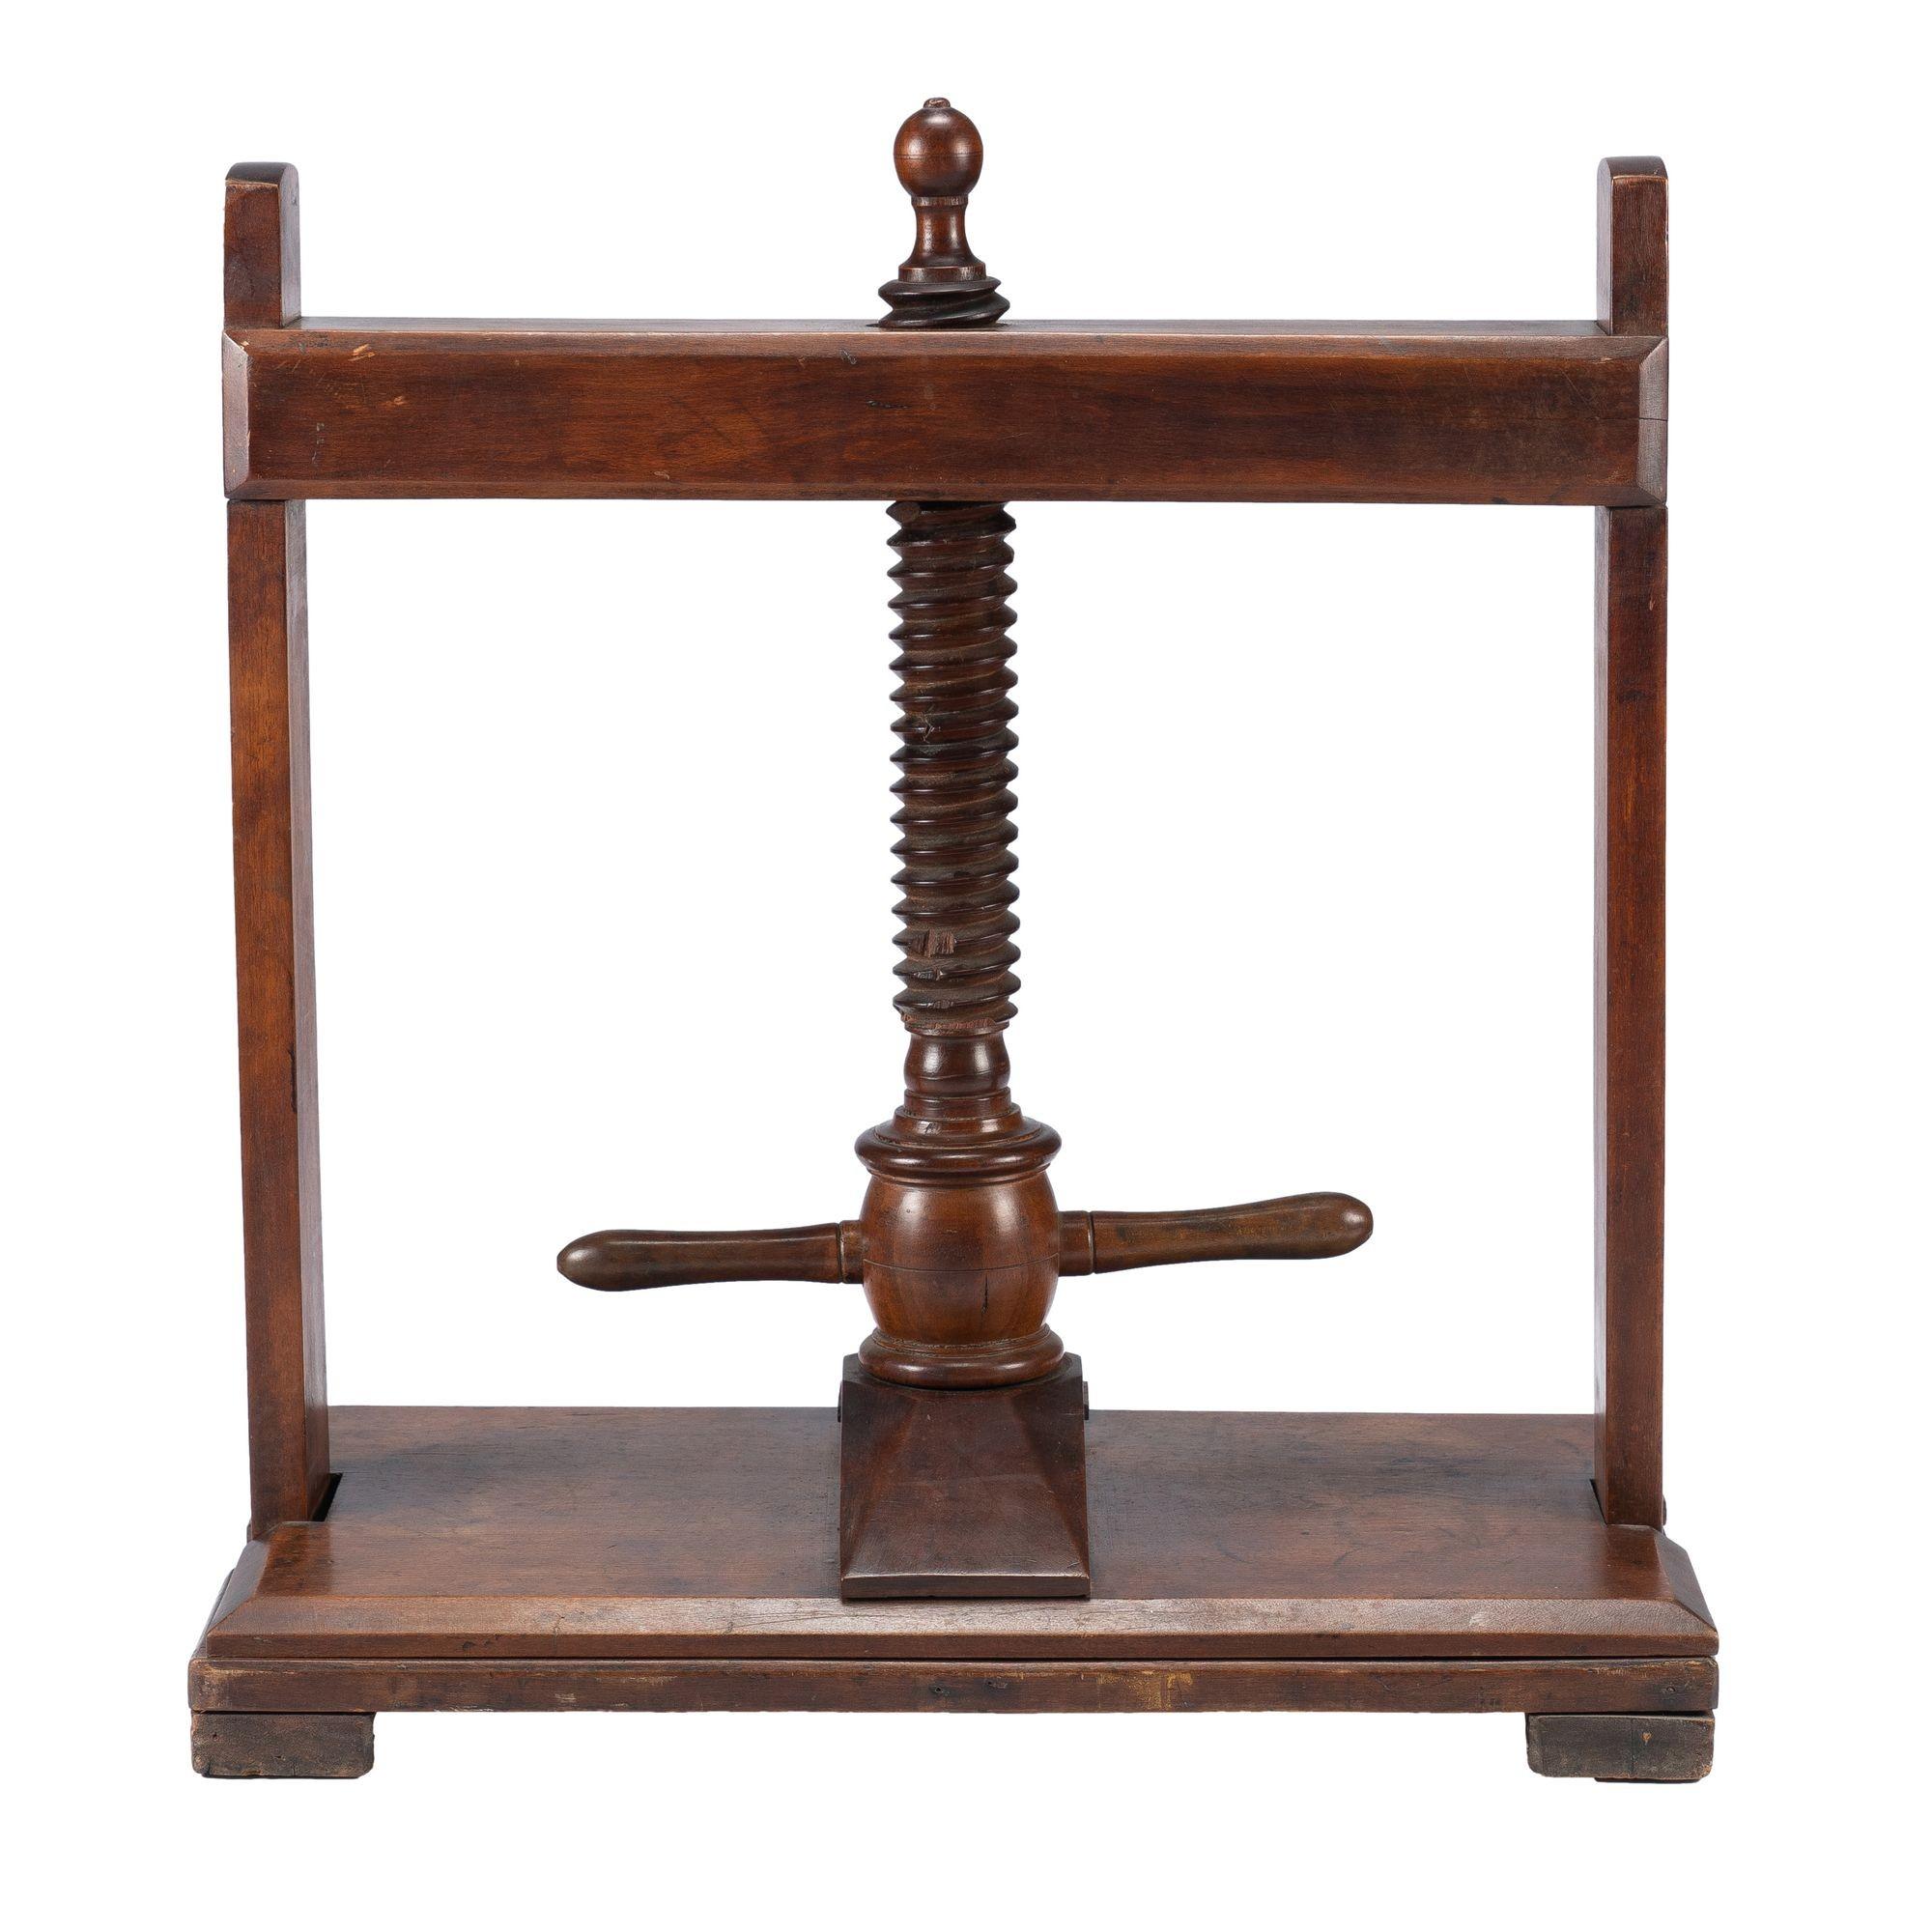 Black walnut double handled linen press with turned column and acorn finial. Thomas Bradford was a leading English manufacturer of washing machines, mangles, wringers, drying closets, and linen presses, with stores in London, Manchester, Salford,